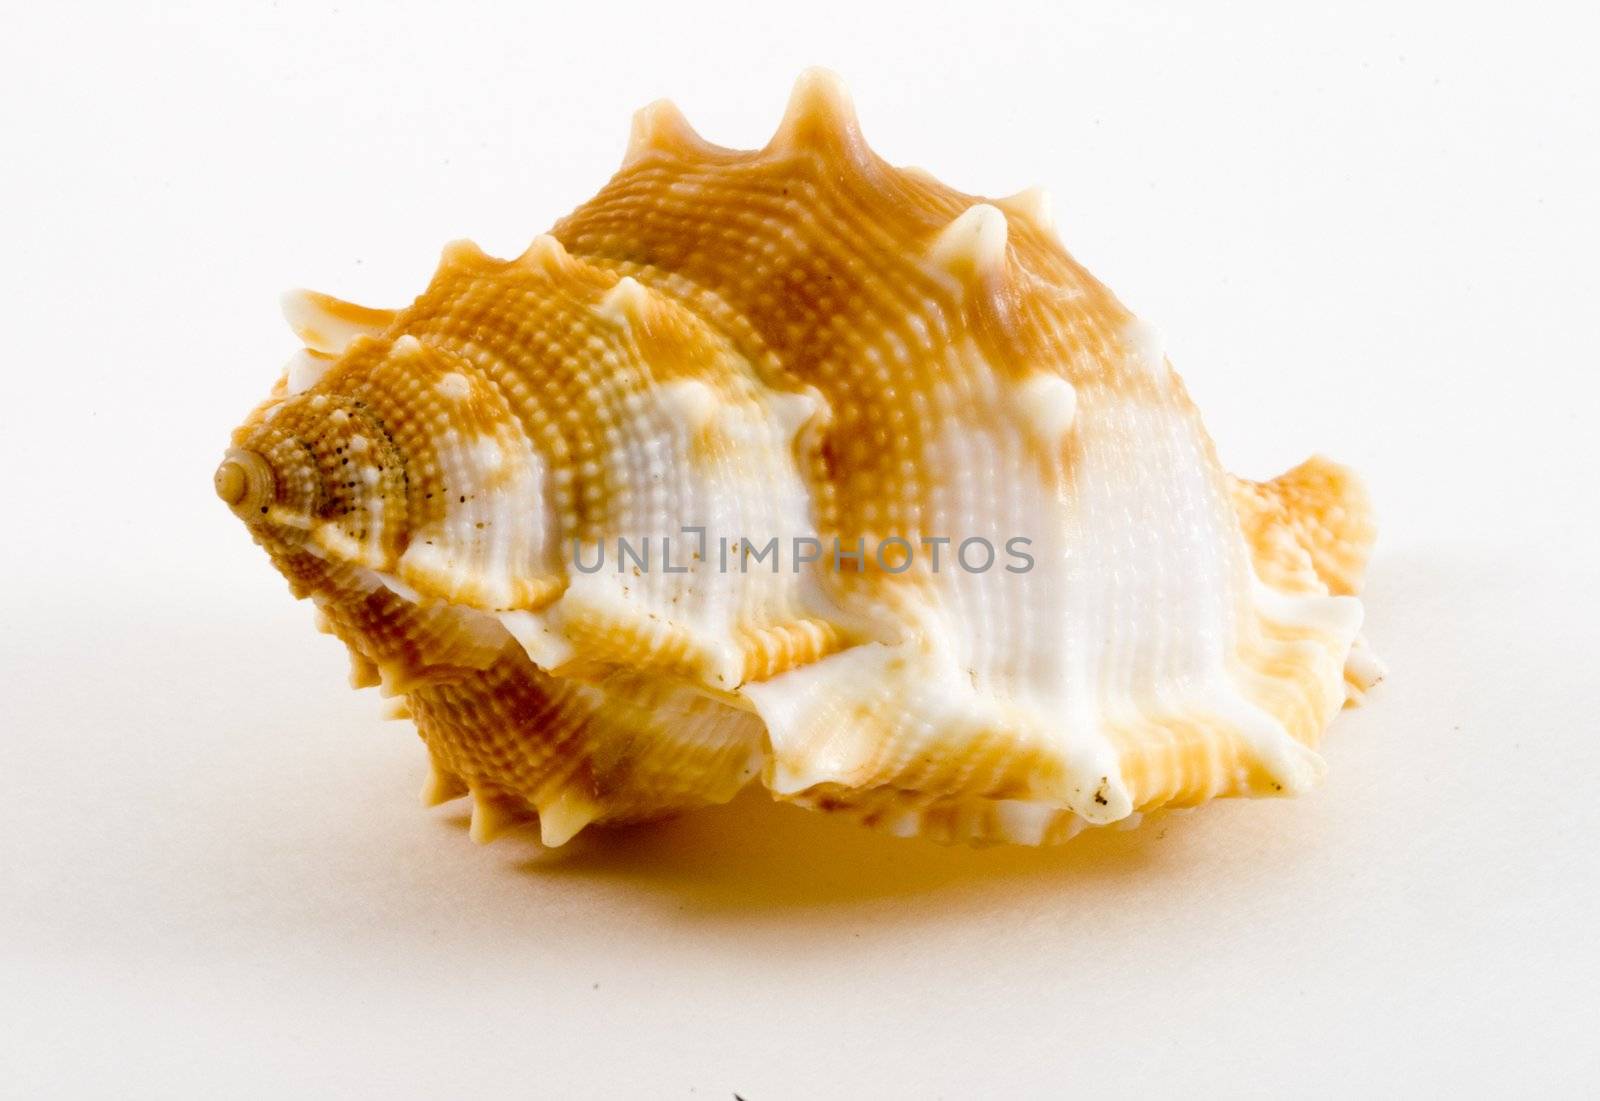 detail of a conch on the white background